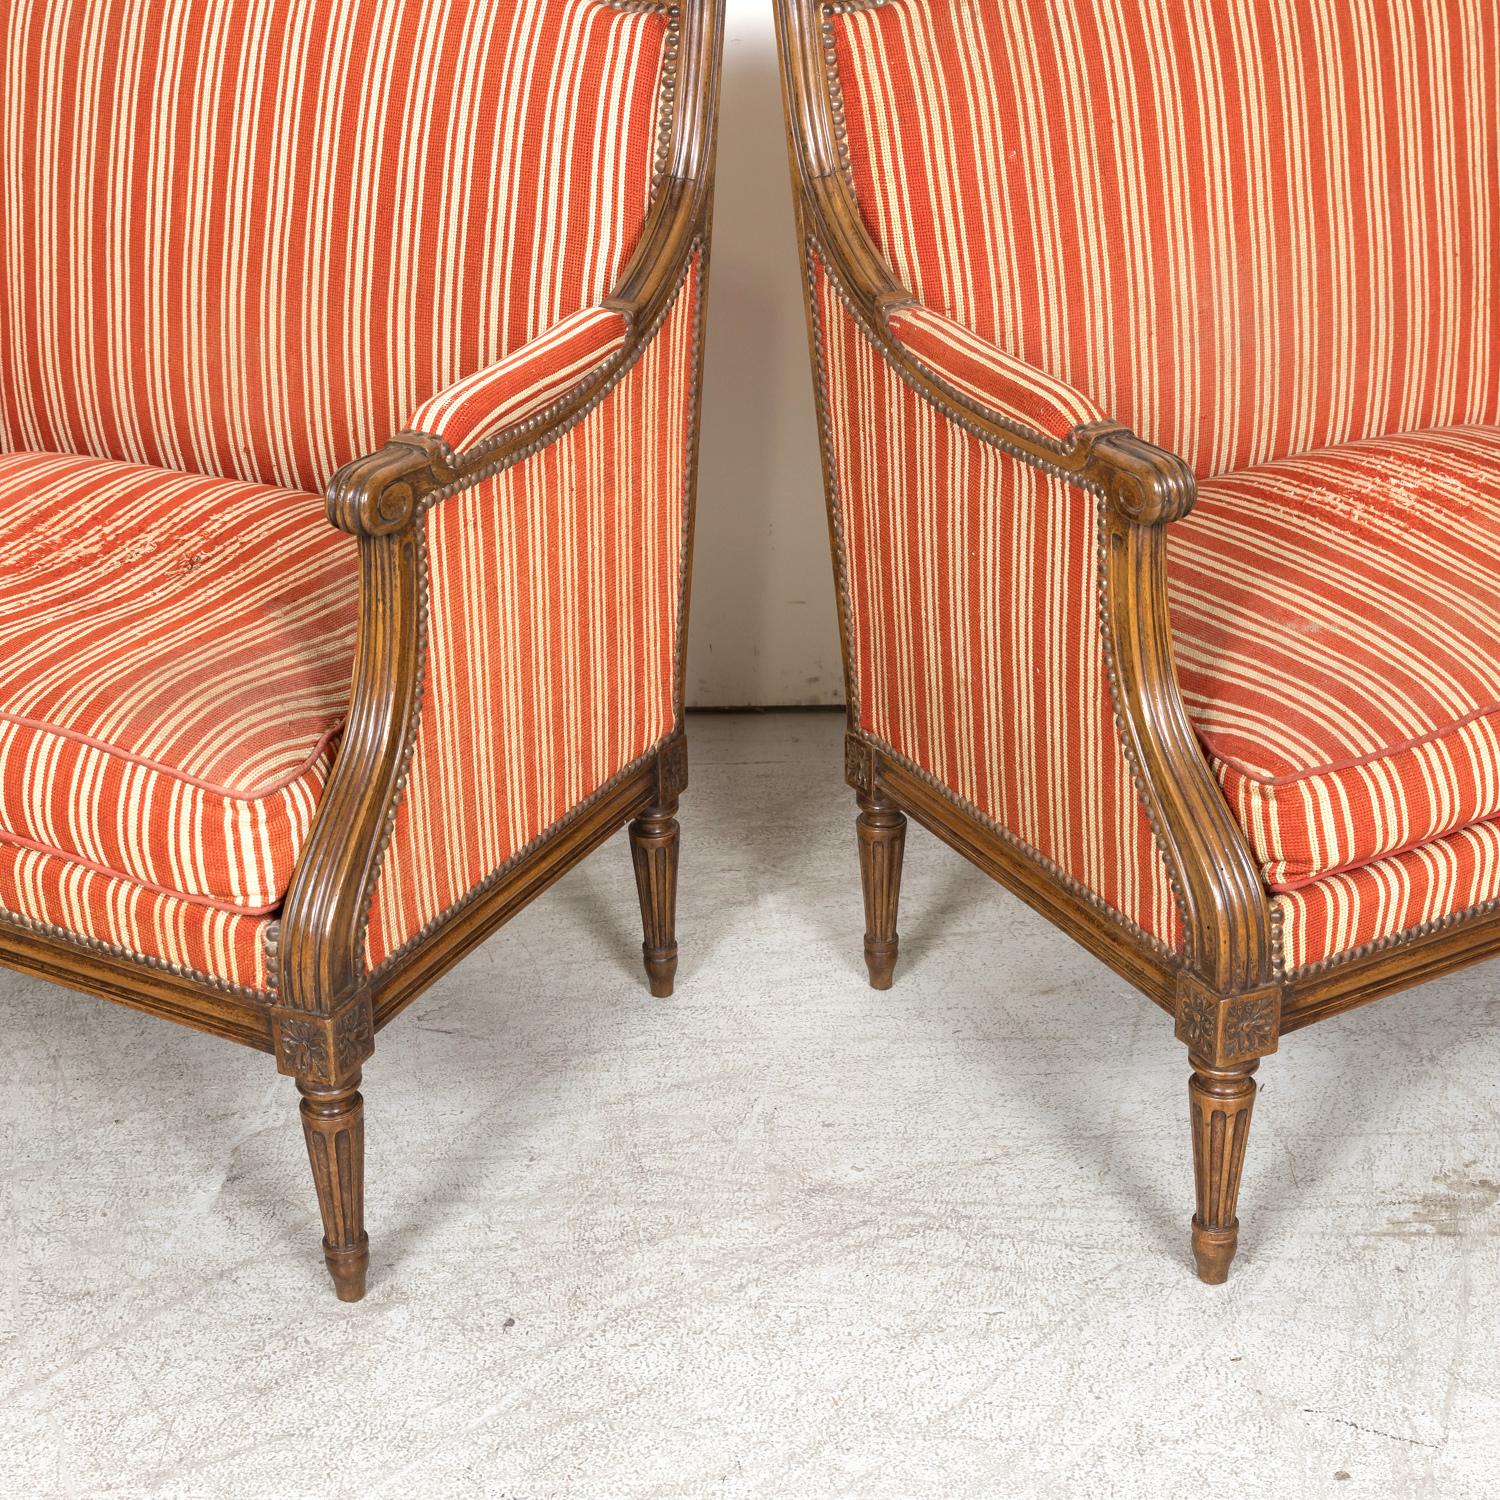 Pair of 19th Century French Louis XVI Style Oversized Bergere Marquise Armchairs For Sale 5